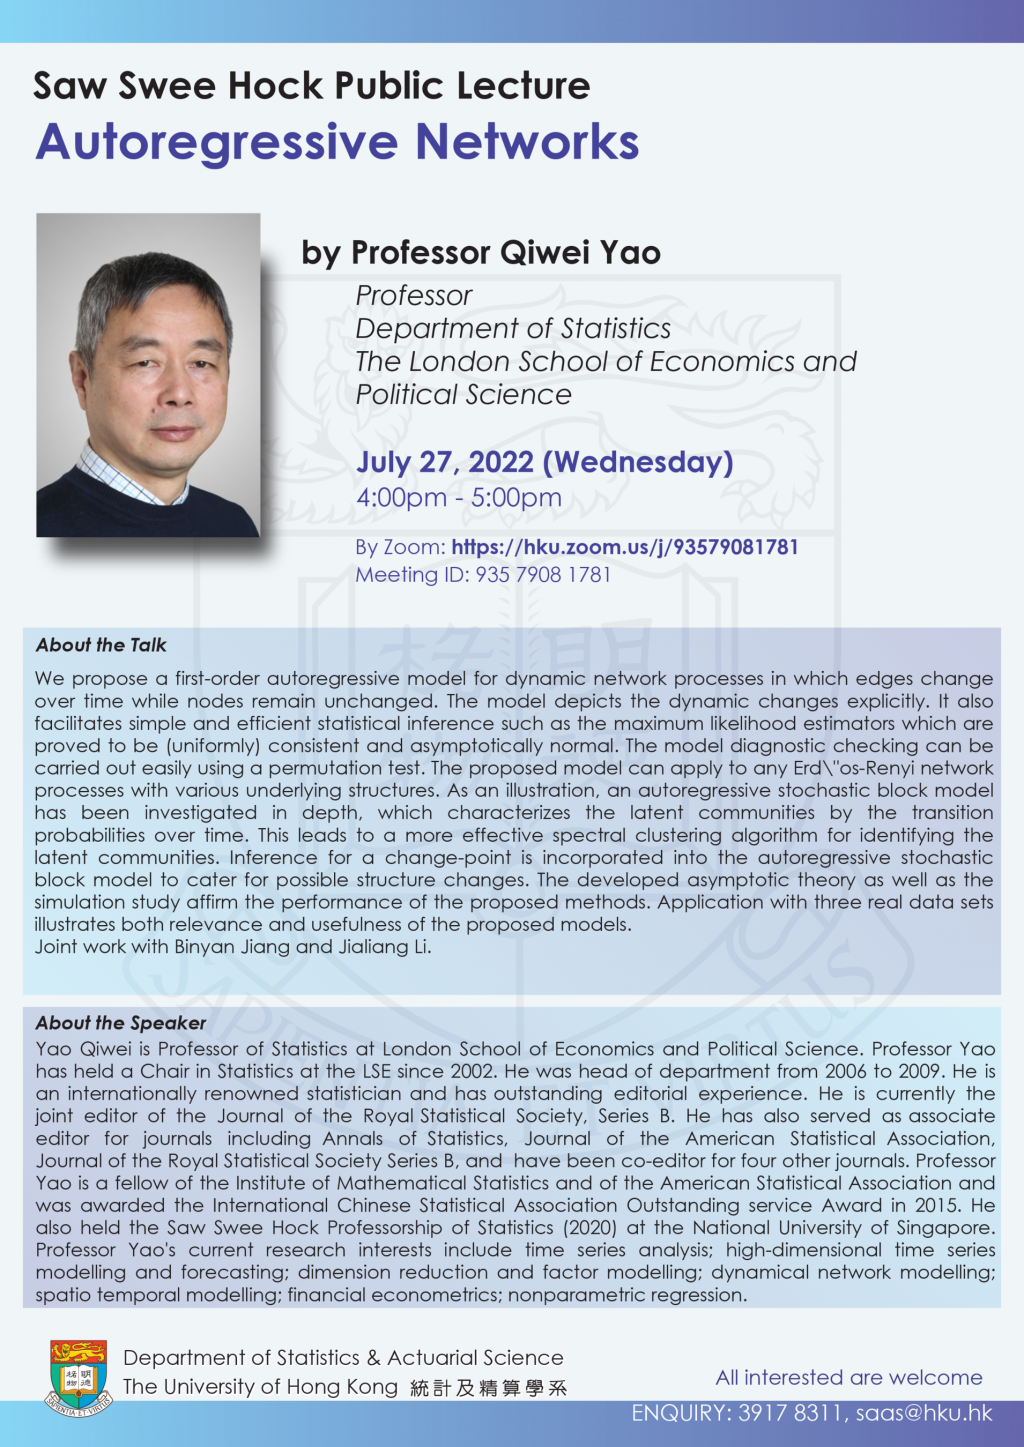 Saw Swee Hock Public Lecture on 'Autoregressive Networks' by Professor Qiwei YAO on July 27, 2022